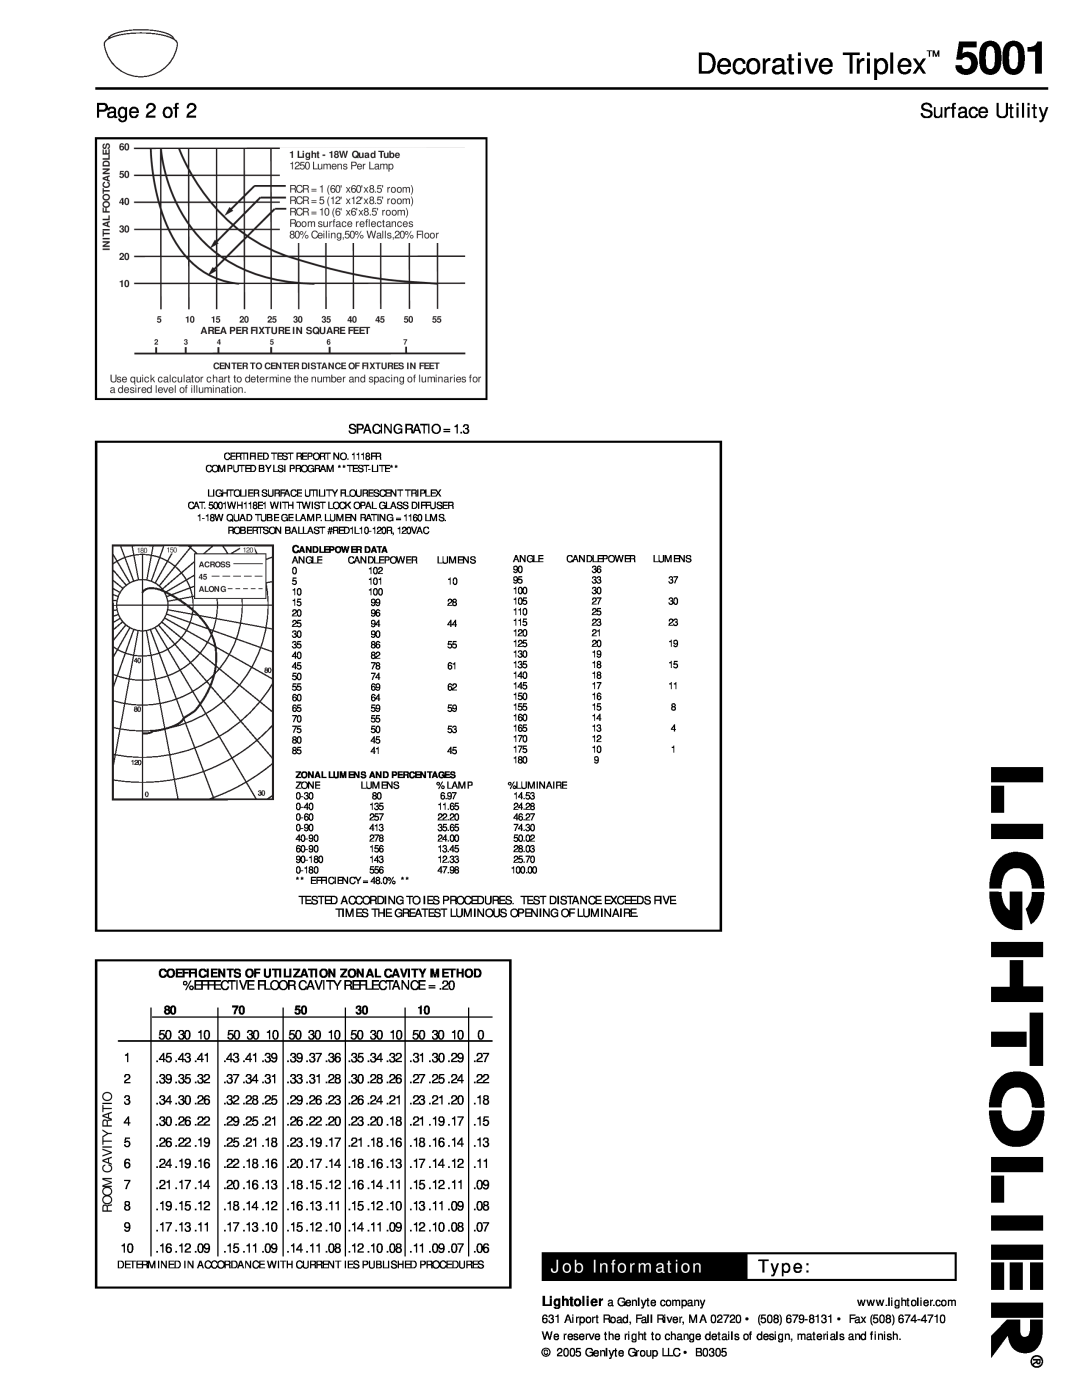 Lightolier 5001 manual Page 2 of, Decorative Triplex, Surface Utility, Job Information, Type 